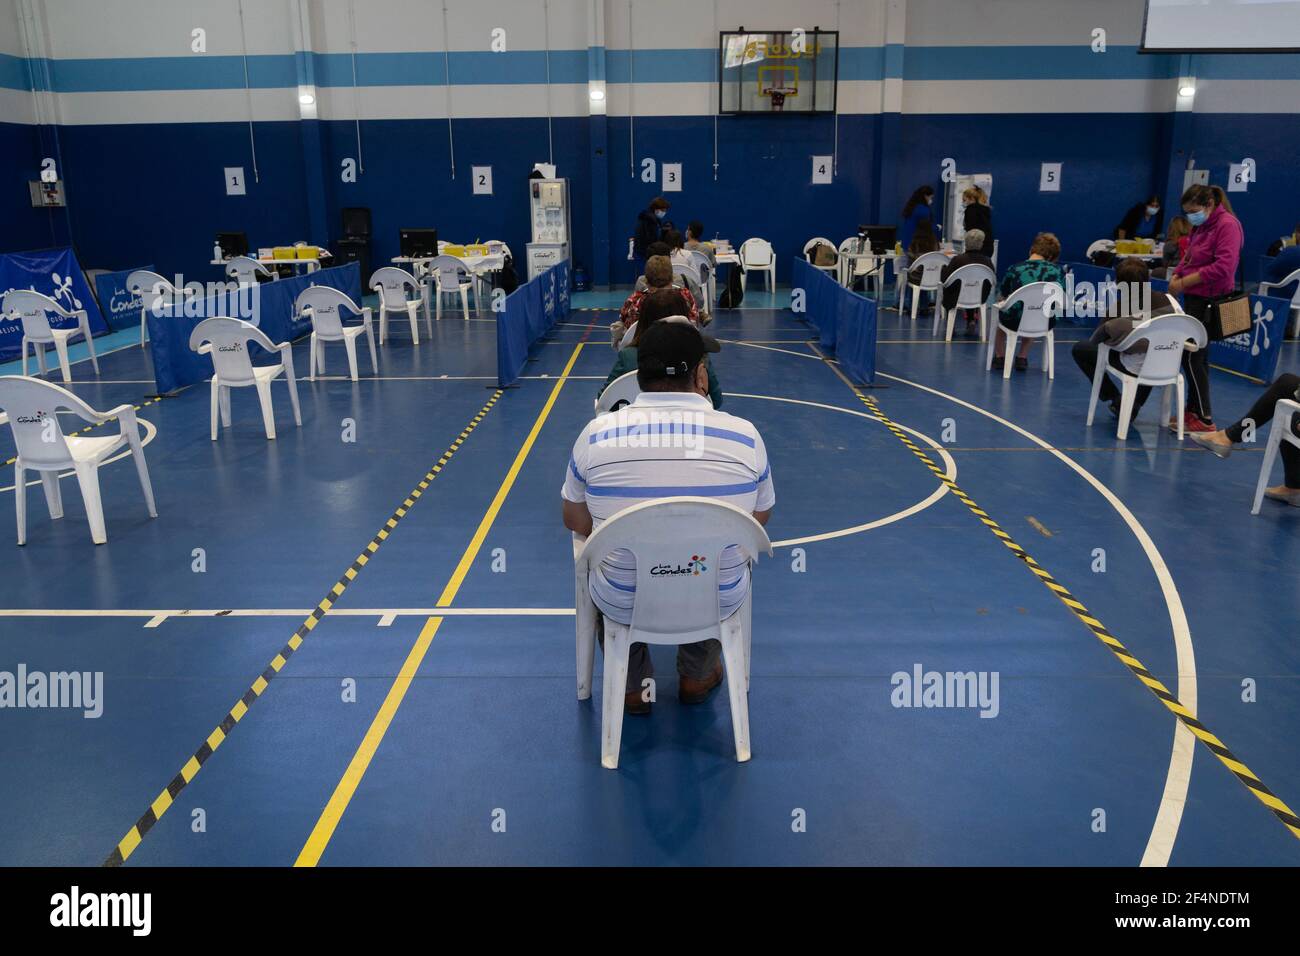 Santiago, Metropolitana, Chile. 22nd Mar, 2021. A man waits in line to receive the dose of the Sinovac or Pfizer vaccine, in a municipal stadium transformed into a vaccination center against covid in Santiago, Chile. Credit: Matias Basualdo/ZUMA Wire/Alamy Live News Stock Photo